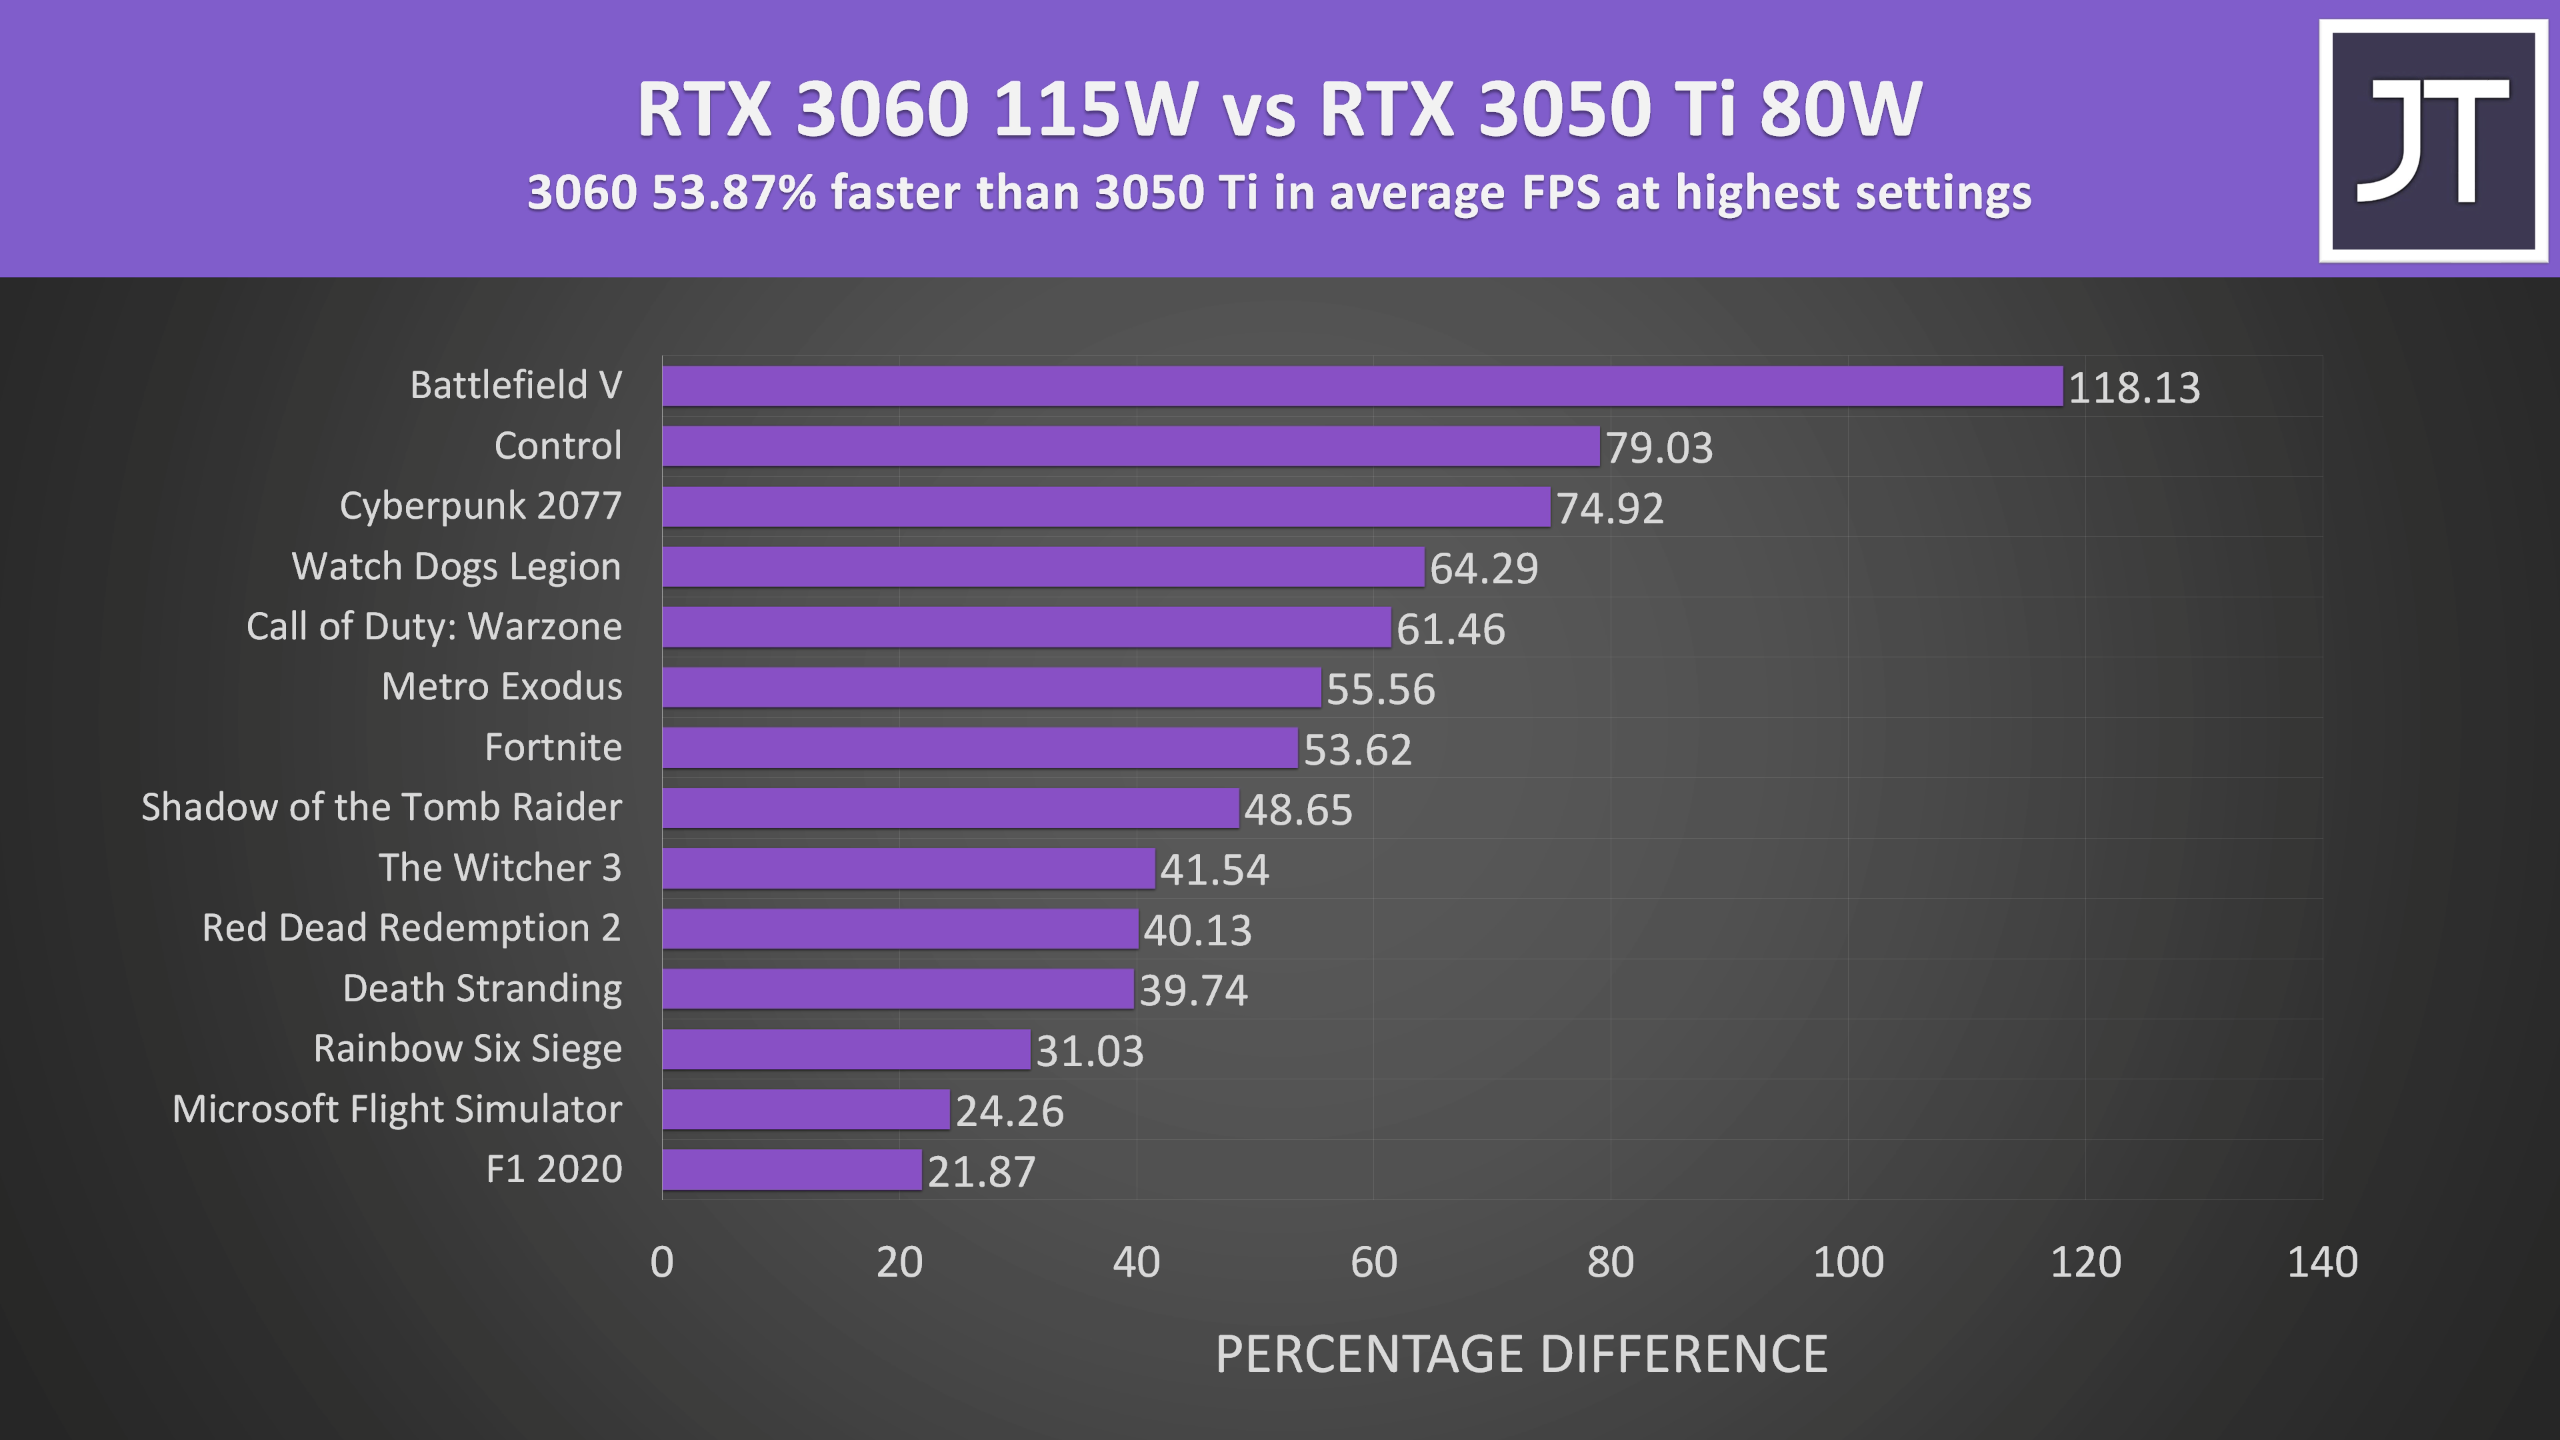 RTX 3050 Ti Laptops Deliver Questionable Performance - AKEX.ca